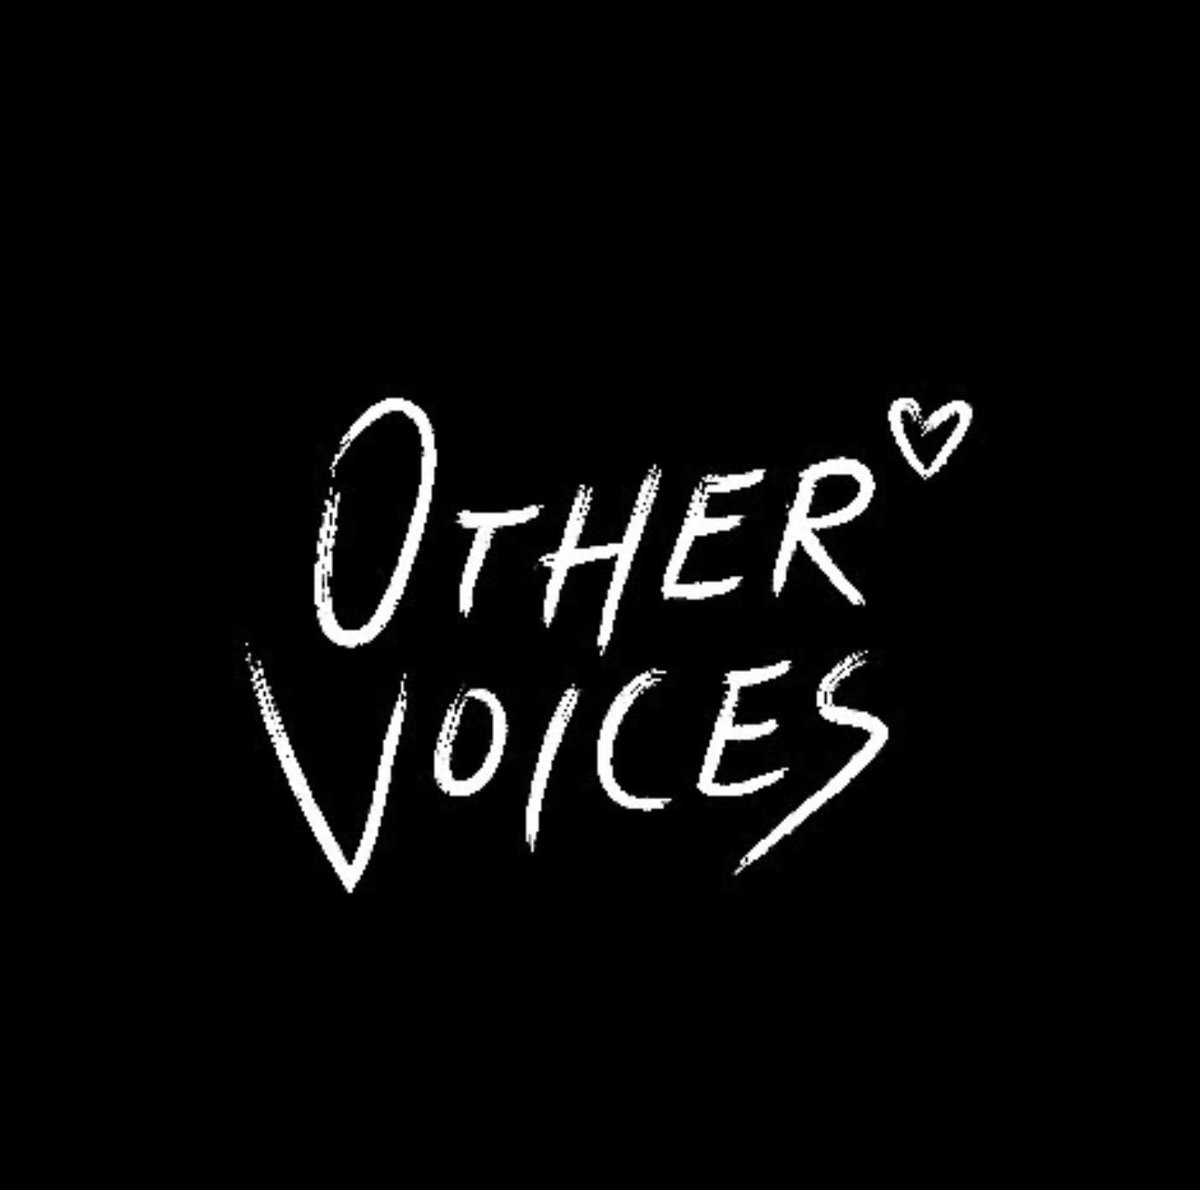 Another lineup of new music before we head into the weekend W/ new tunes from @JackJDora , @CiaranMoranIRE , @BiigPiigMusic , @meganoneill & more plus I’ll be talking all things @OtherVoicesLive with some special guests on The New Music Show from 7pm on @RTE2fm Happy Thursday ❤️